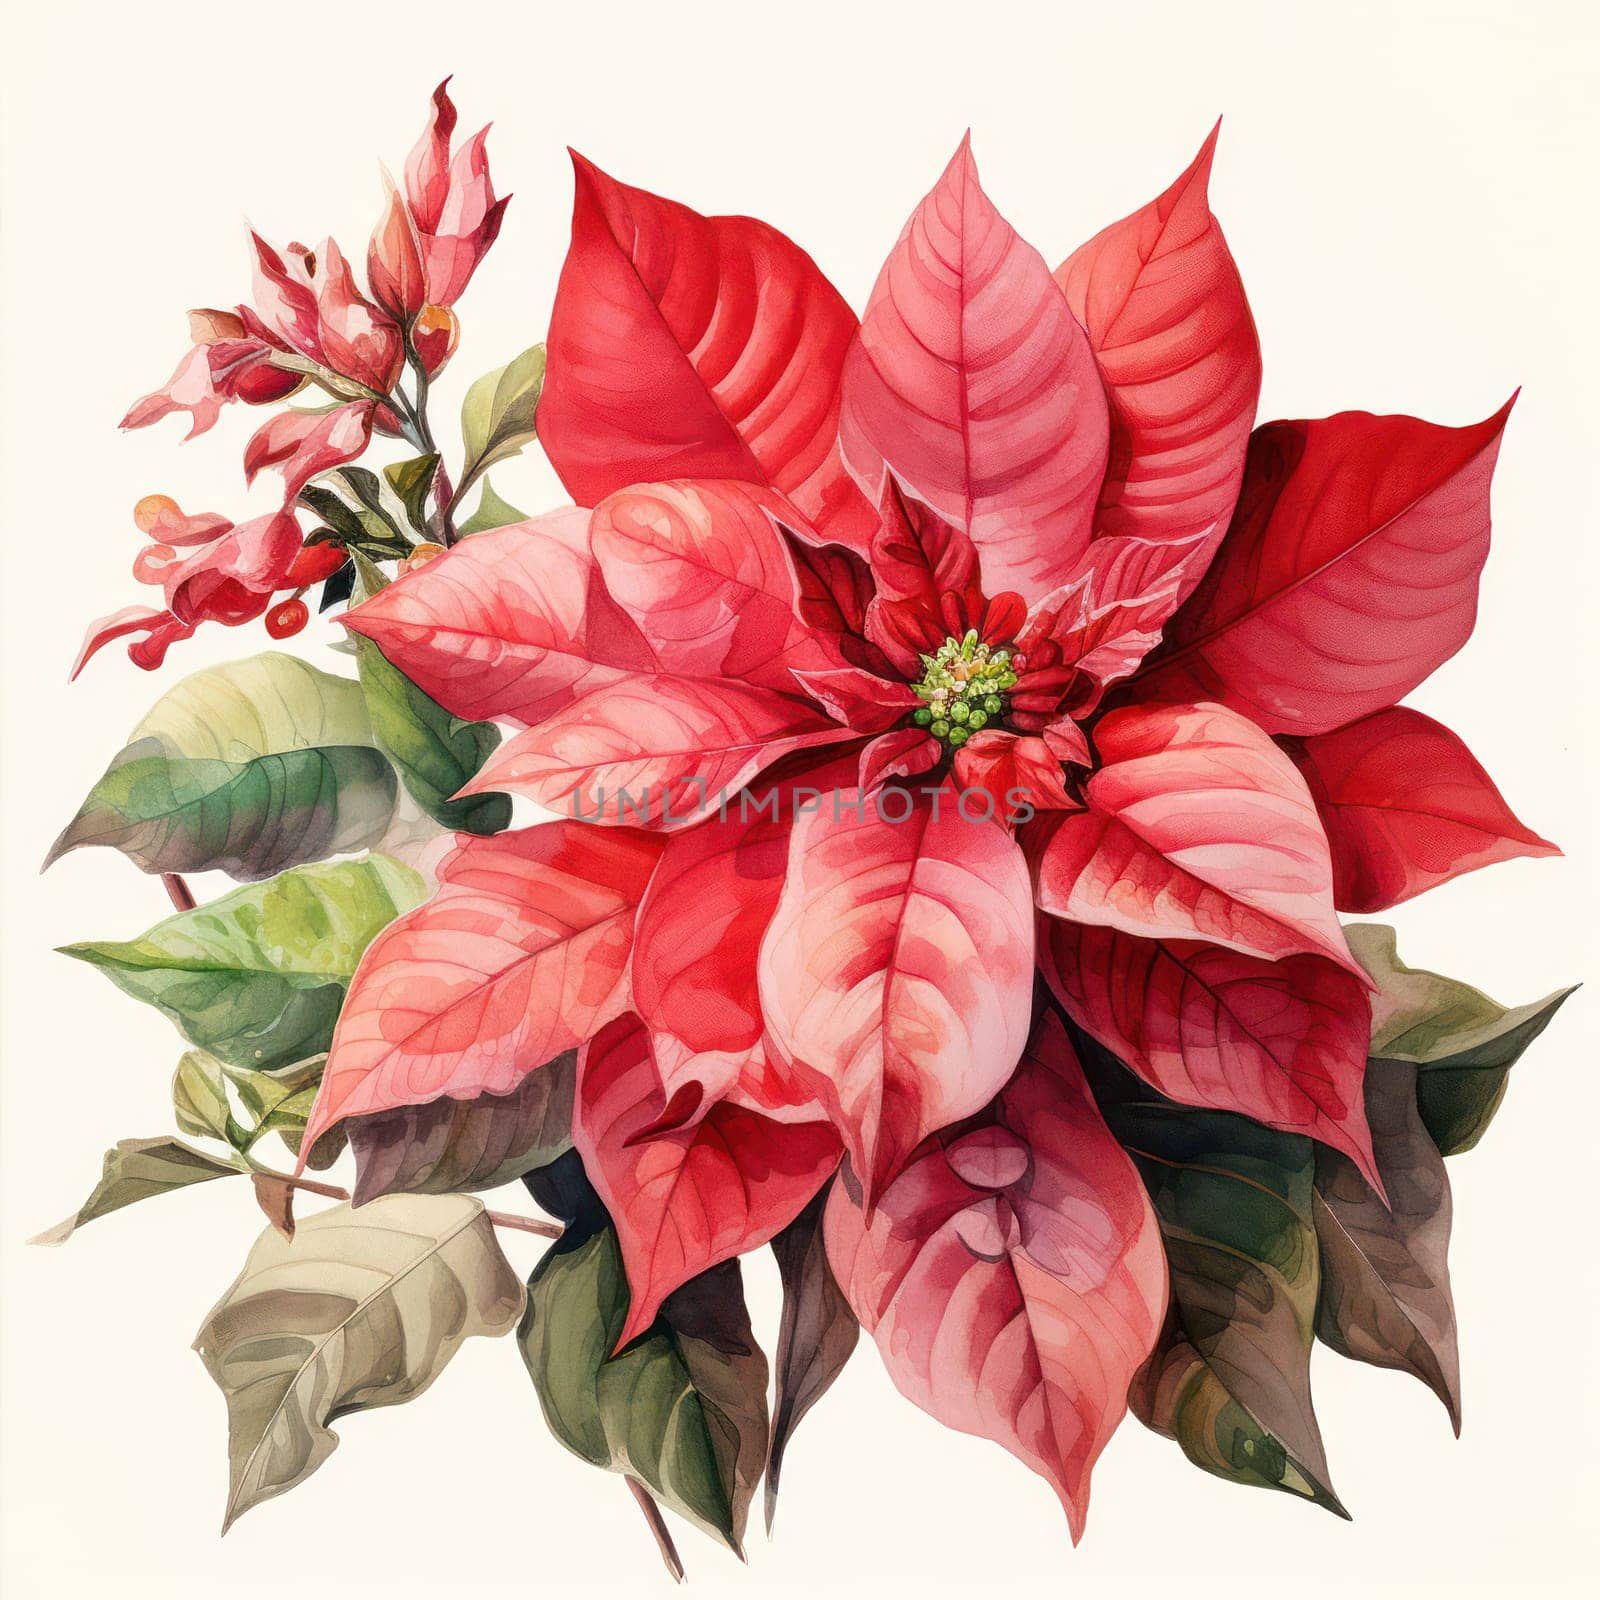 Red Poinsettia: Festive Holiday Floral Illustration with Watercolor Effect on a Bright and Merry Christmas Card